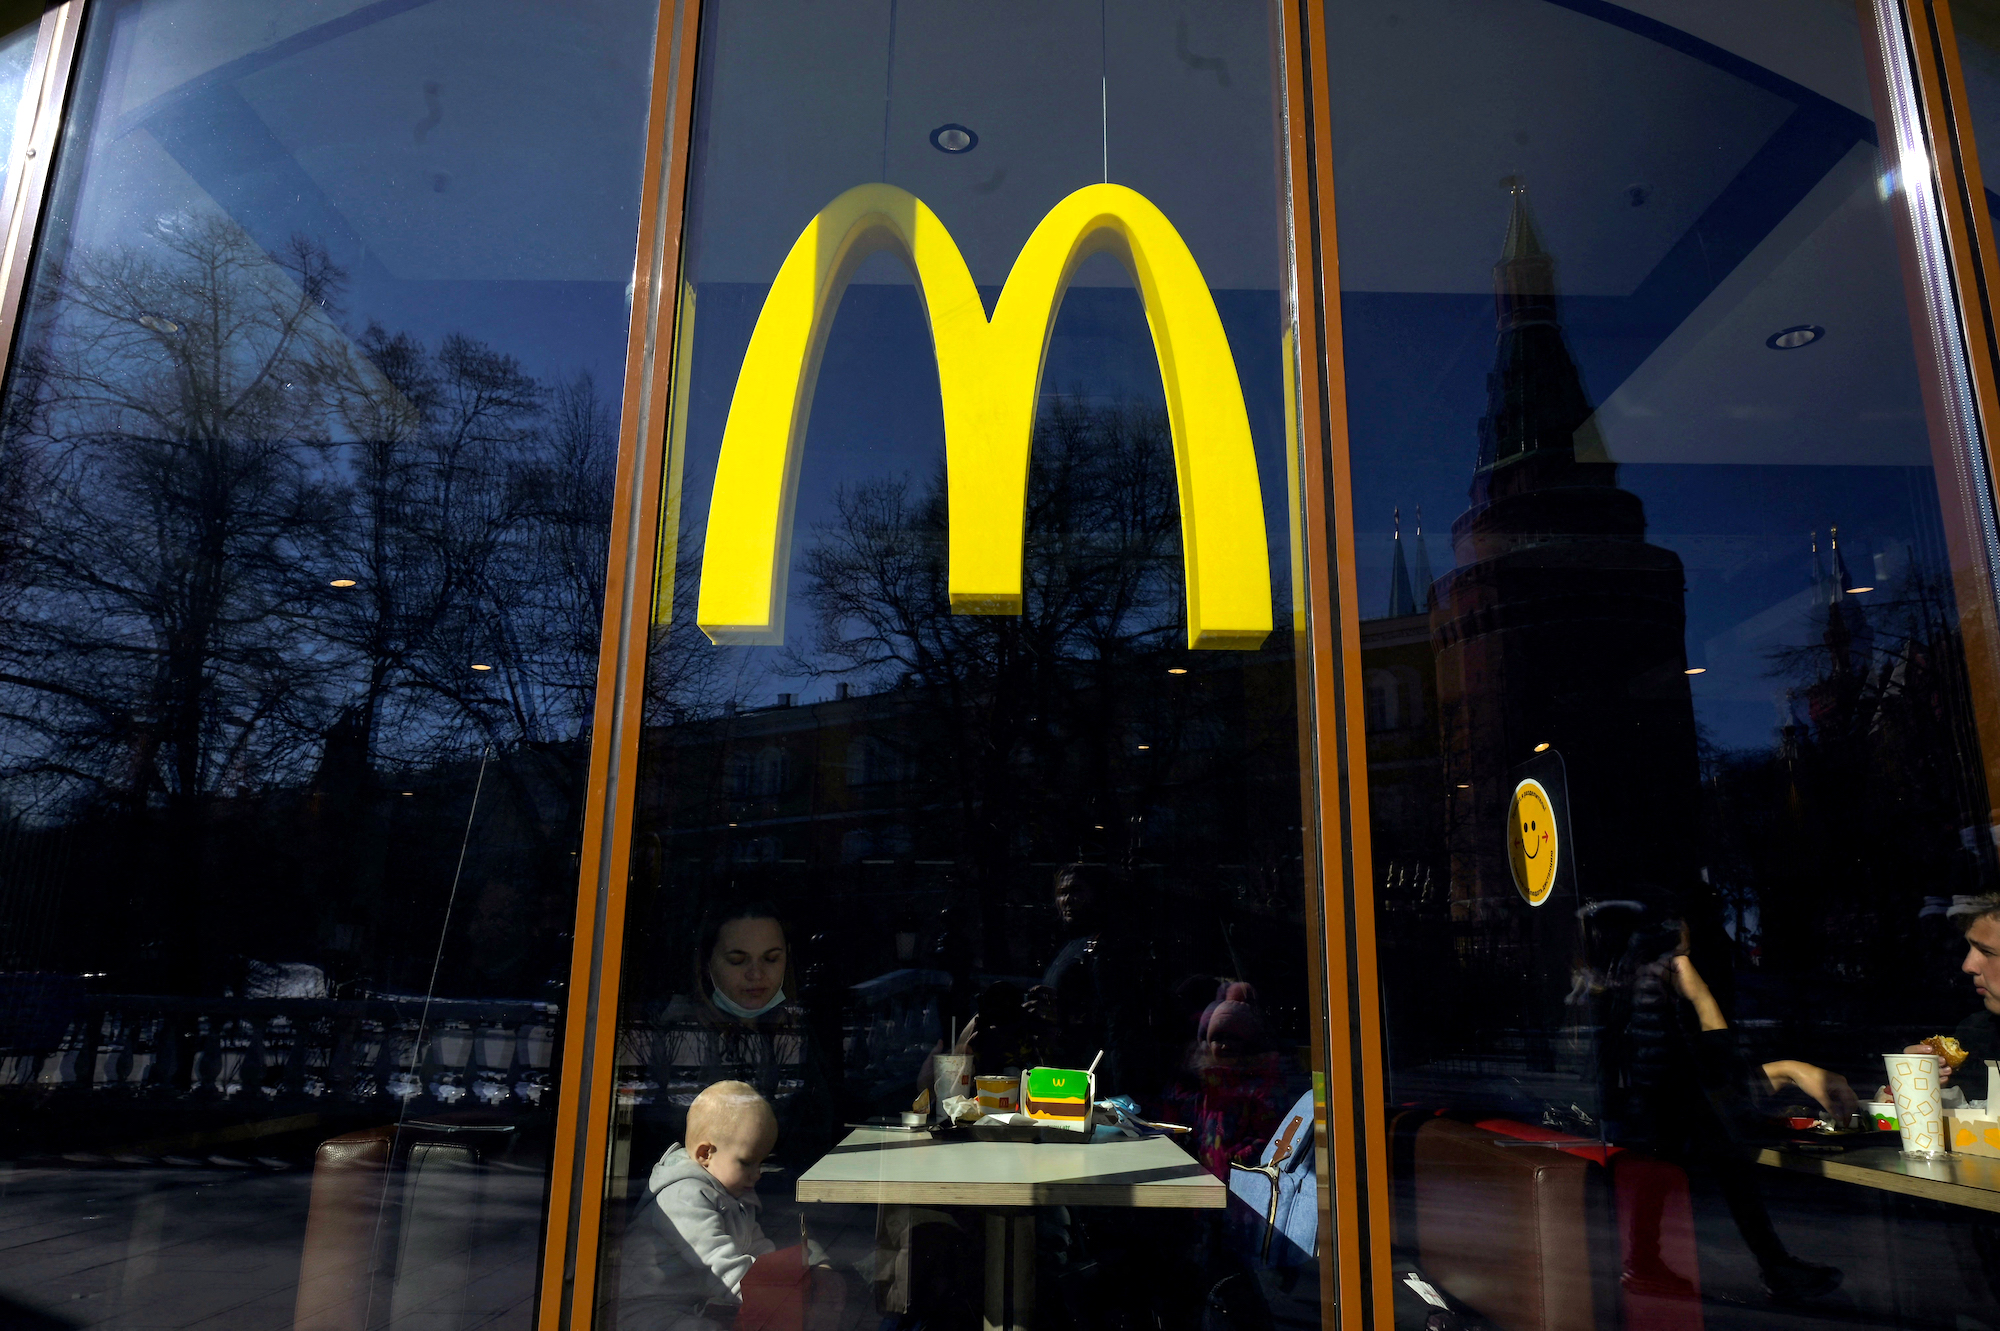 People have lunch at a McDonald's fast food restaurant in central Moscow on March 9, 2022